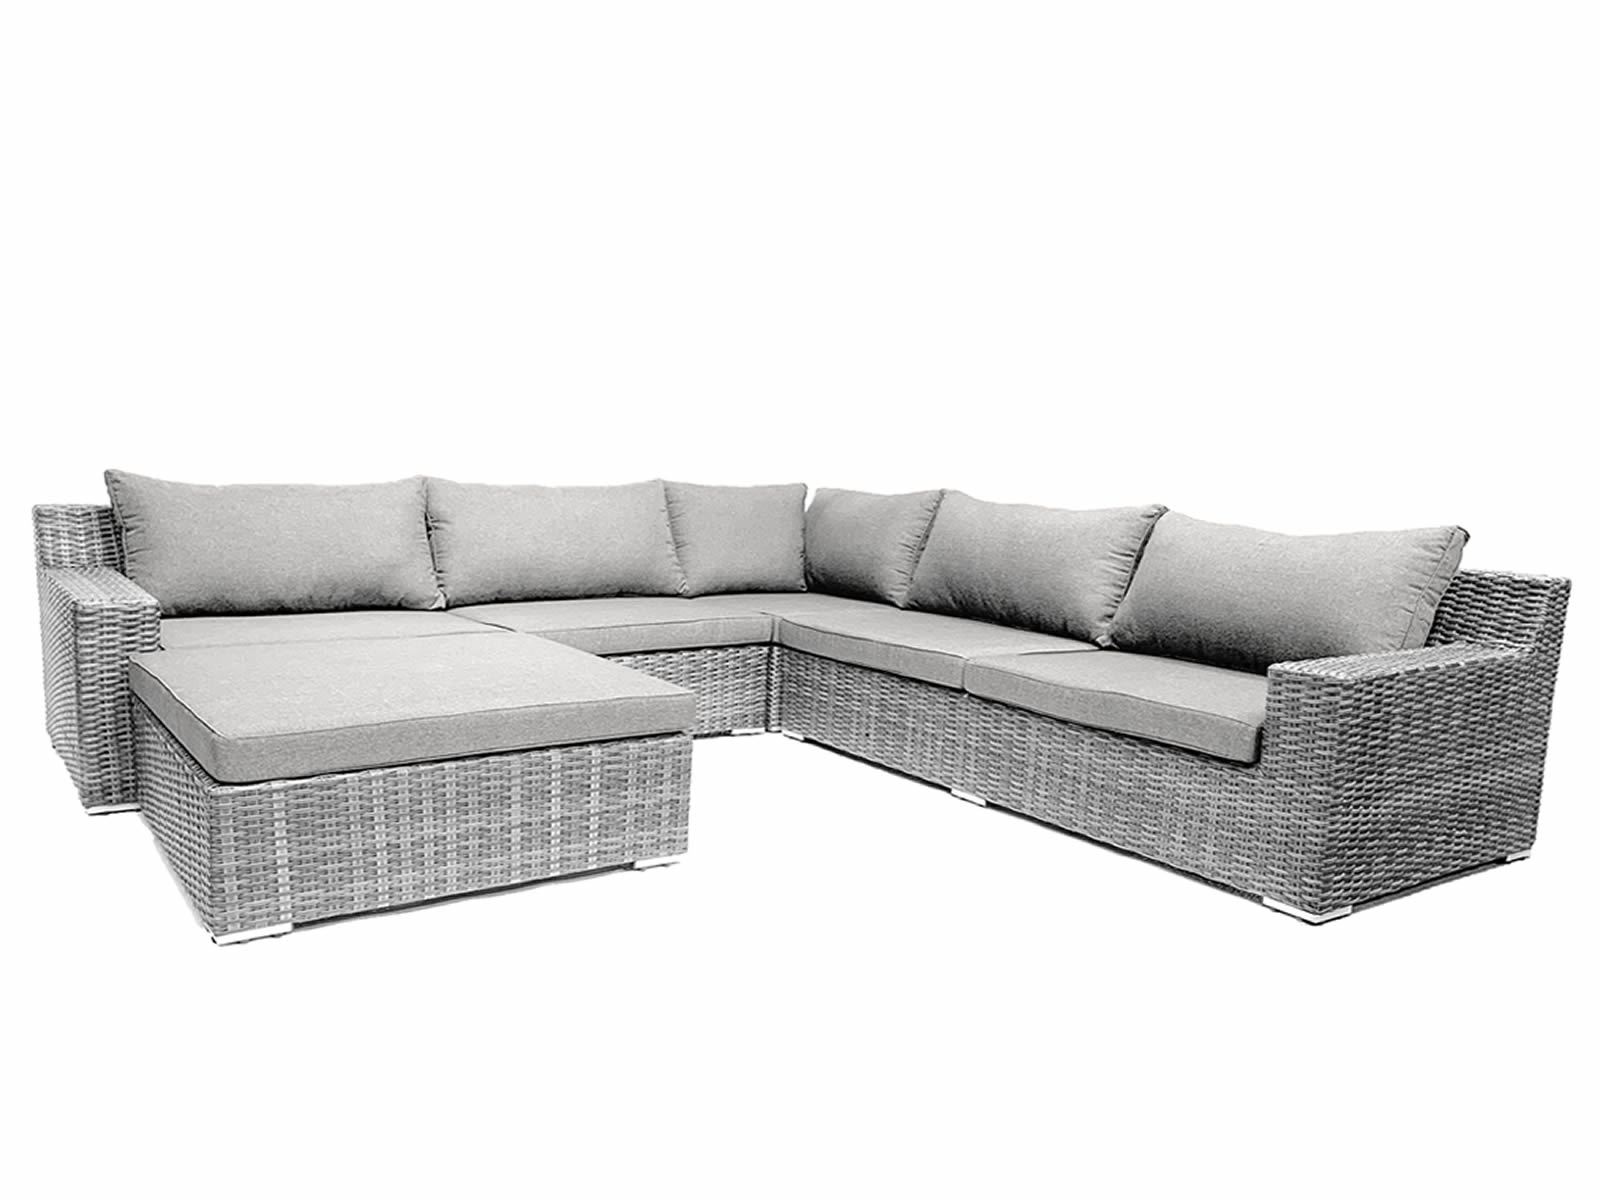 with Yellow cushions lounge 7-person Gray Garden | beige - Blended set Furniture Webshop Garden Colorado |